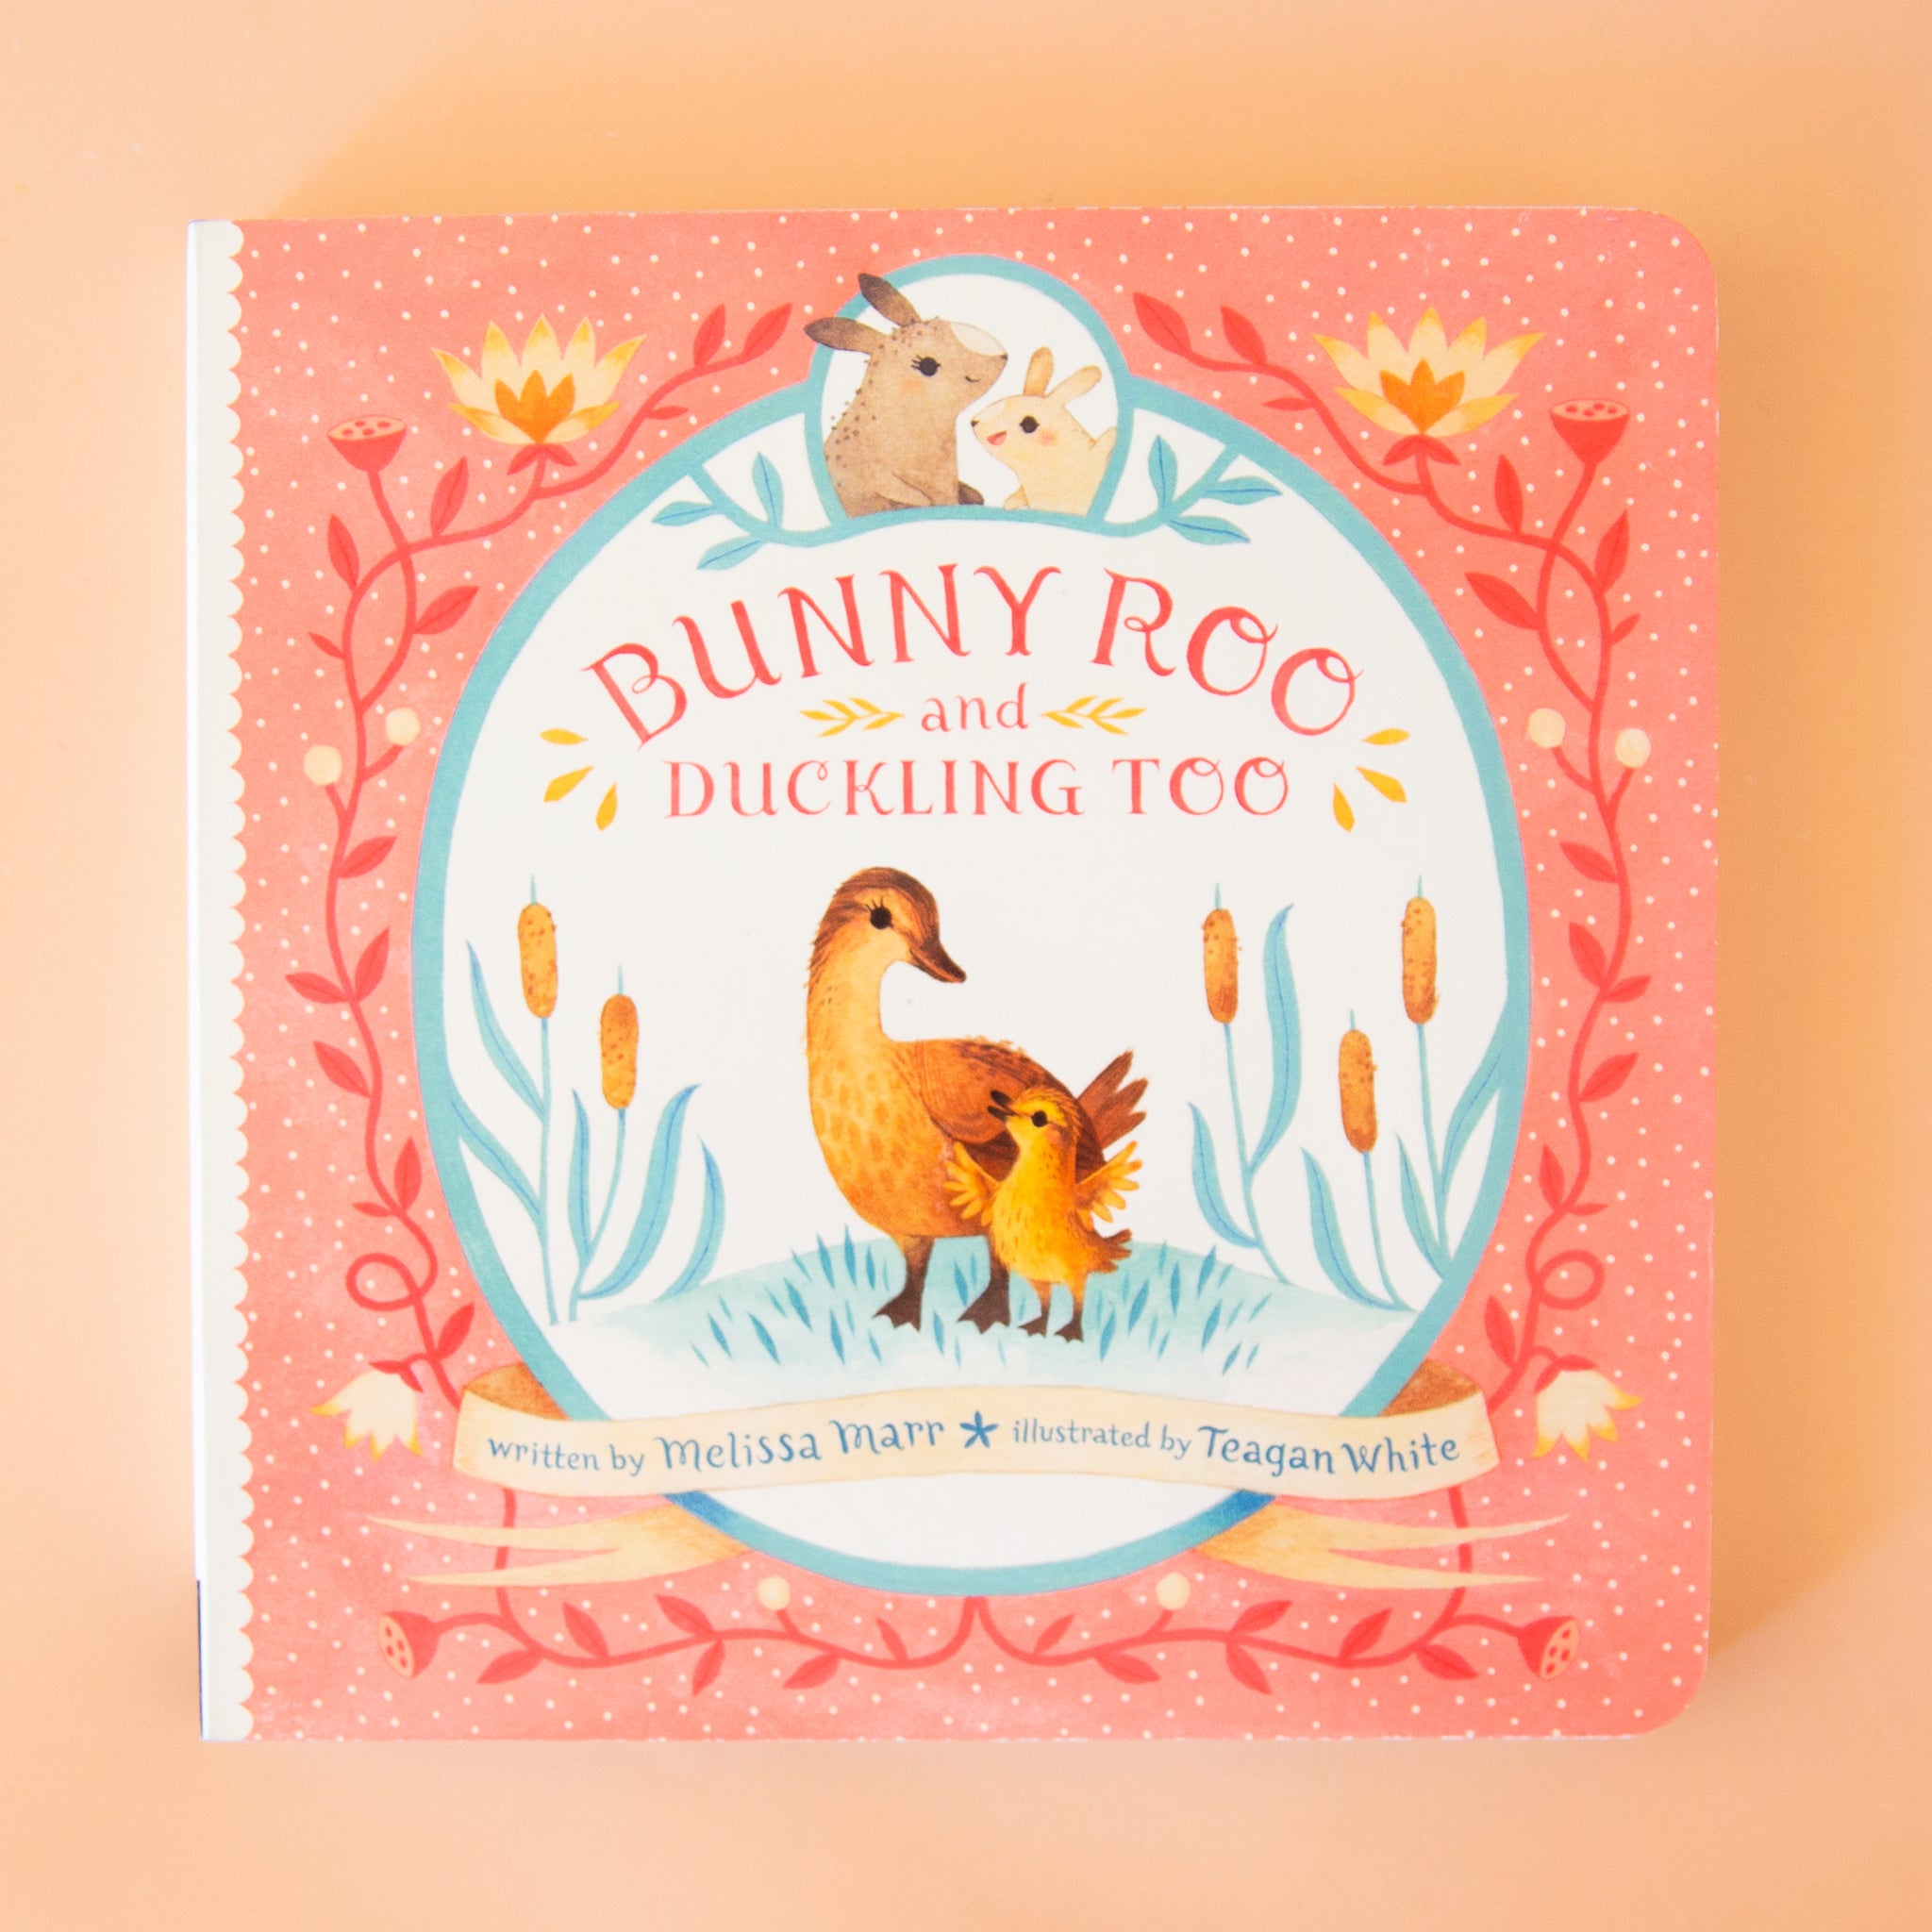 On a tan background is a pink book cover with an illustration of ducks and bunnies and the title that reads, "Bunny Roo and Duckling Too". 